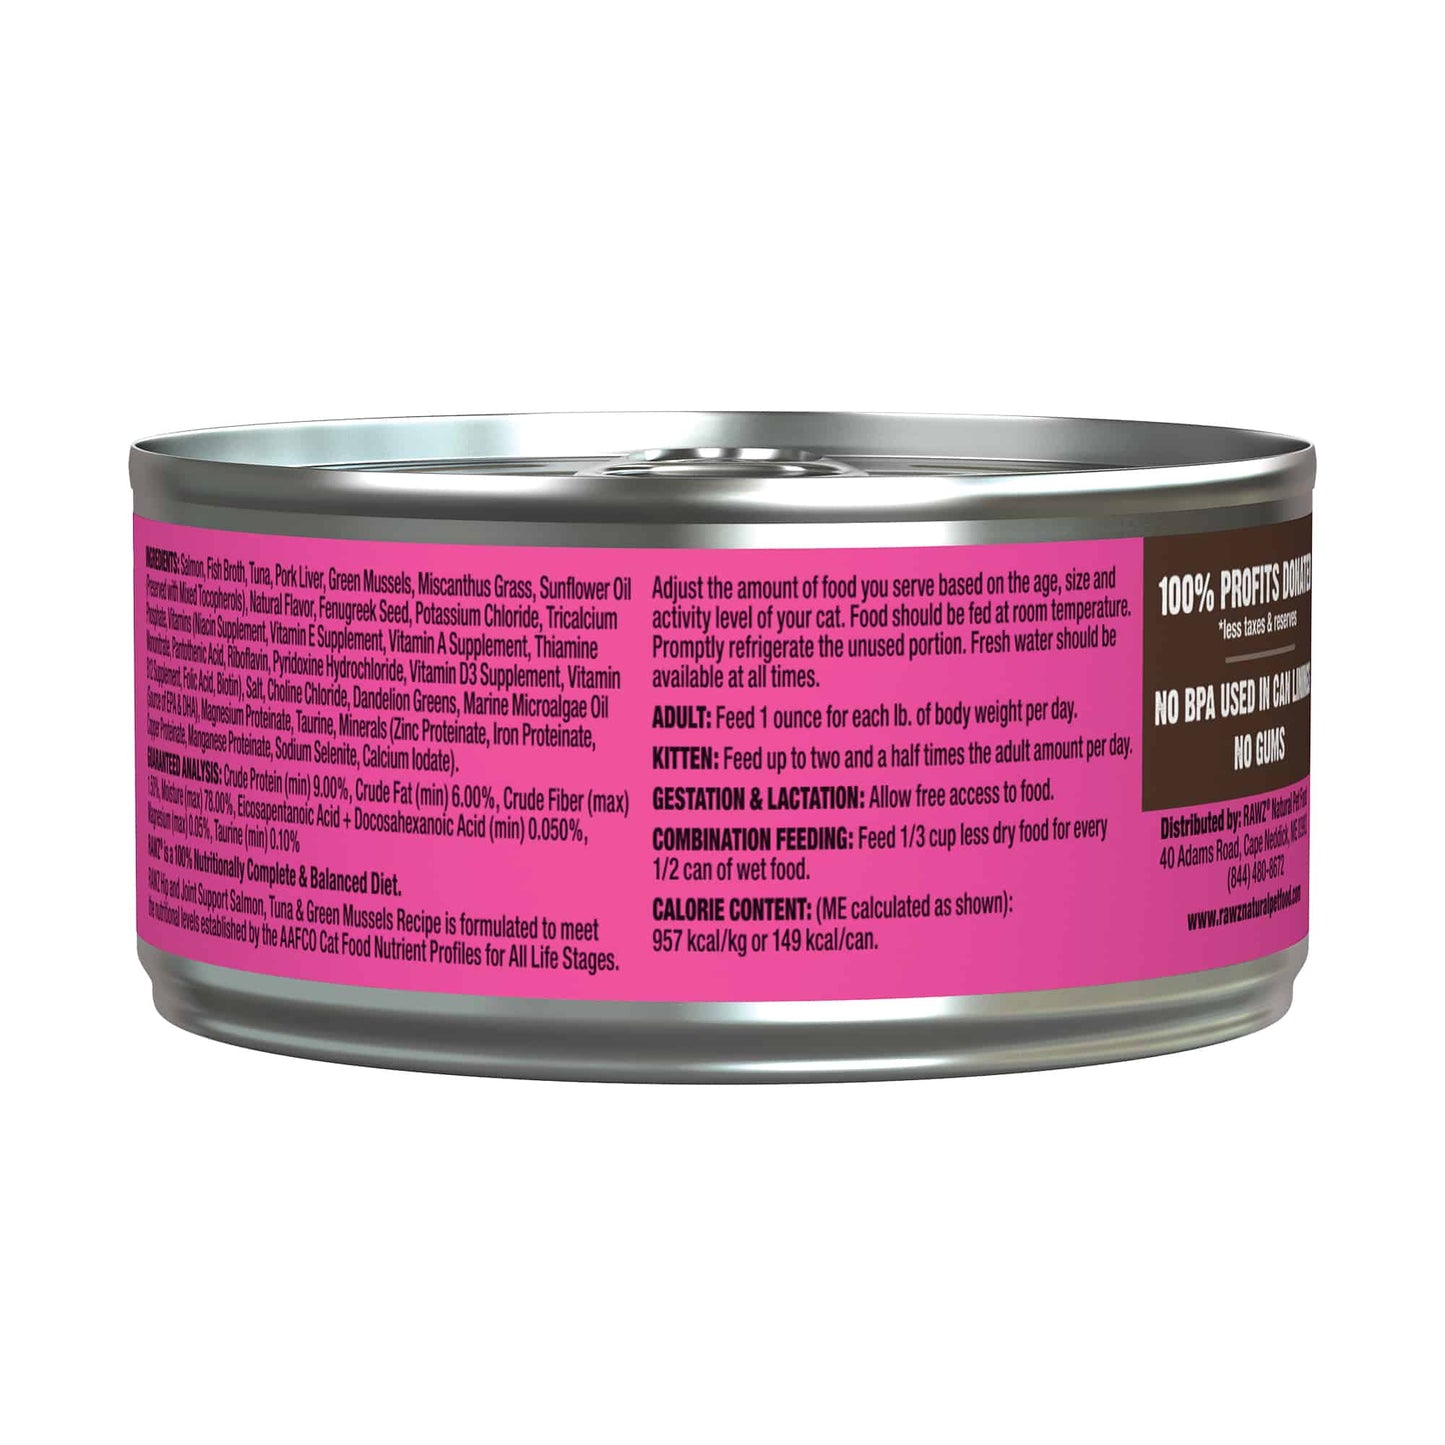 Rawz Hip & Joint Support Salmon, Tuna & Green Mussels Cat Pate-5.5oz